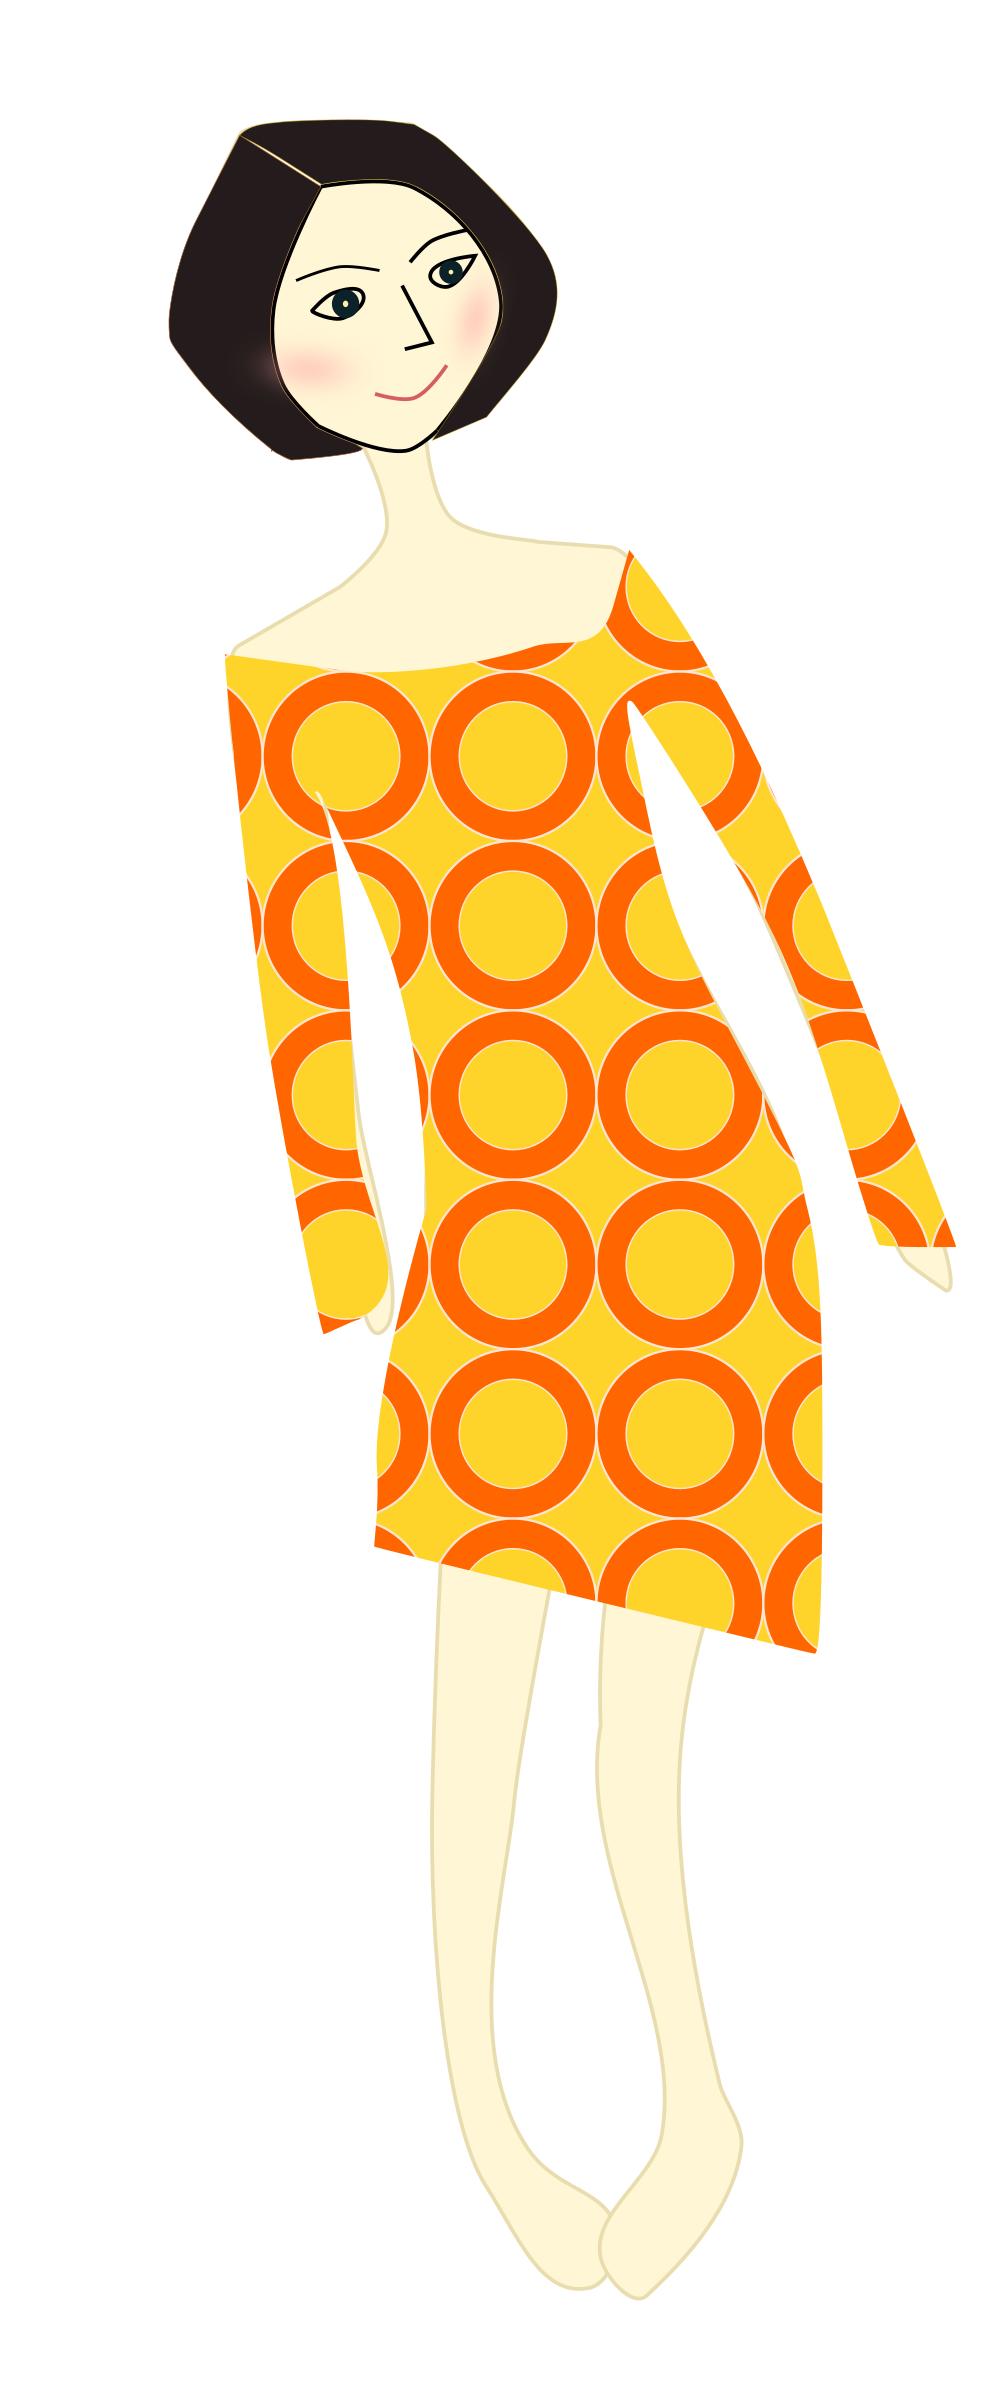 Girl in the dress png